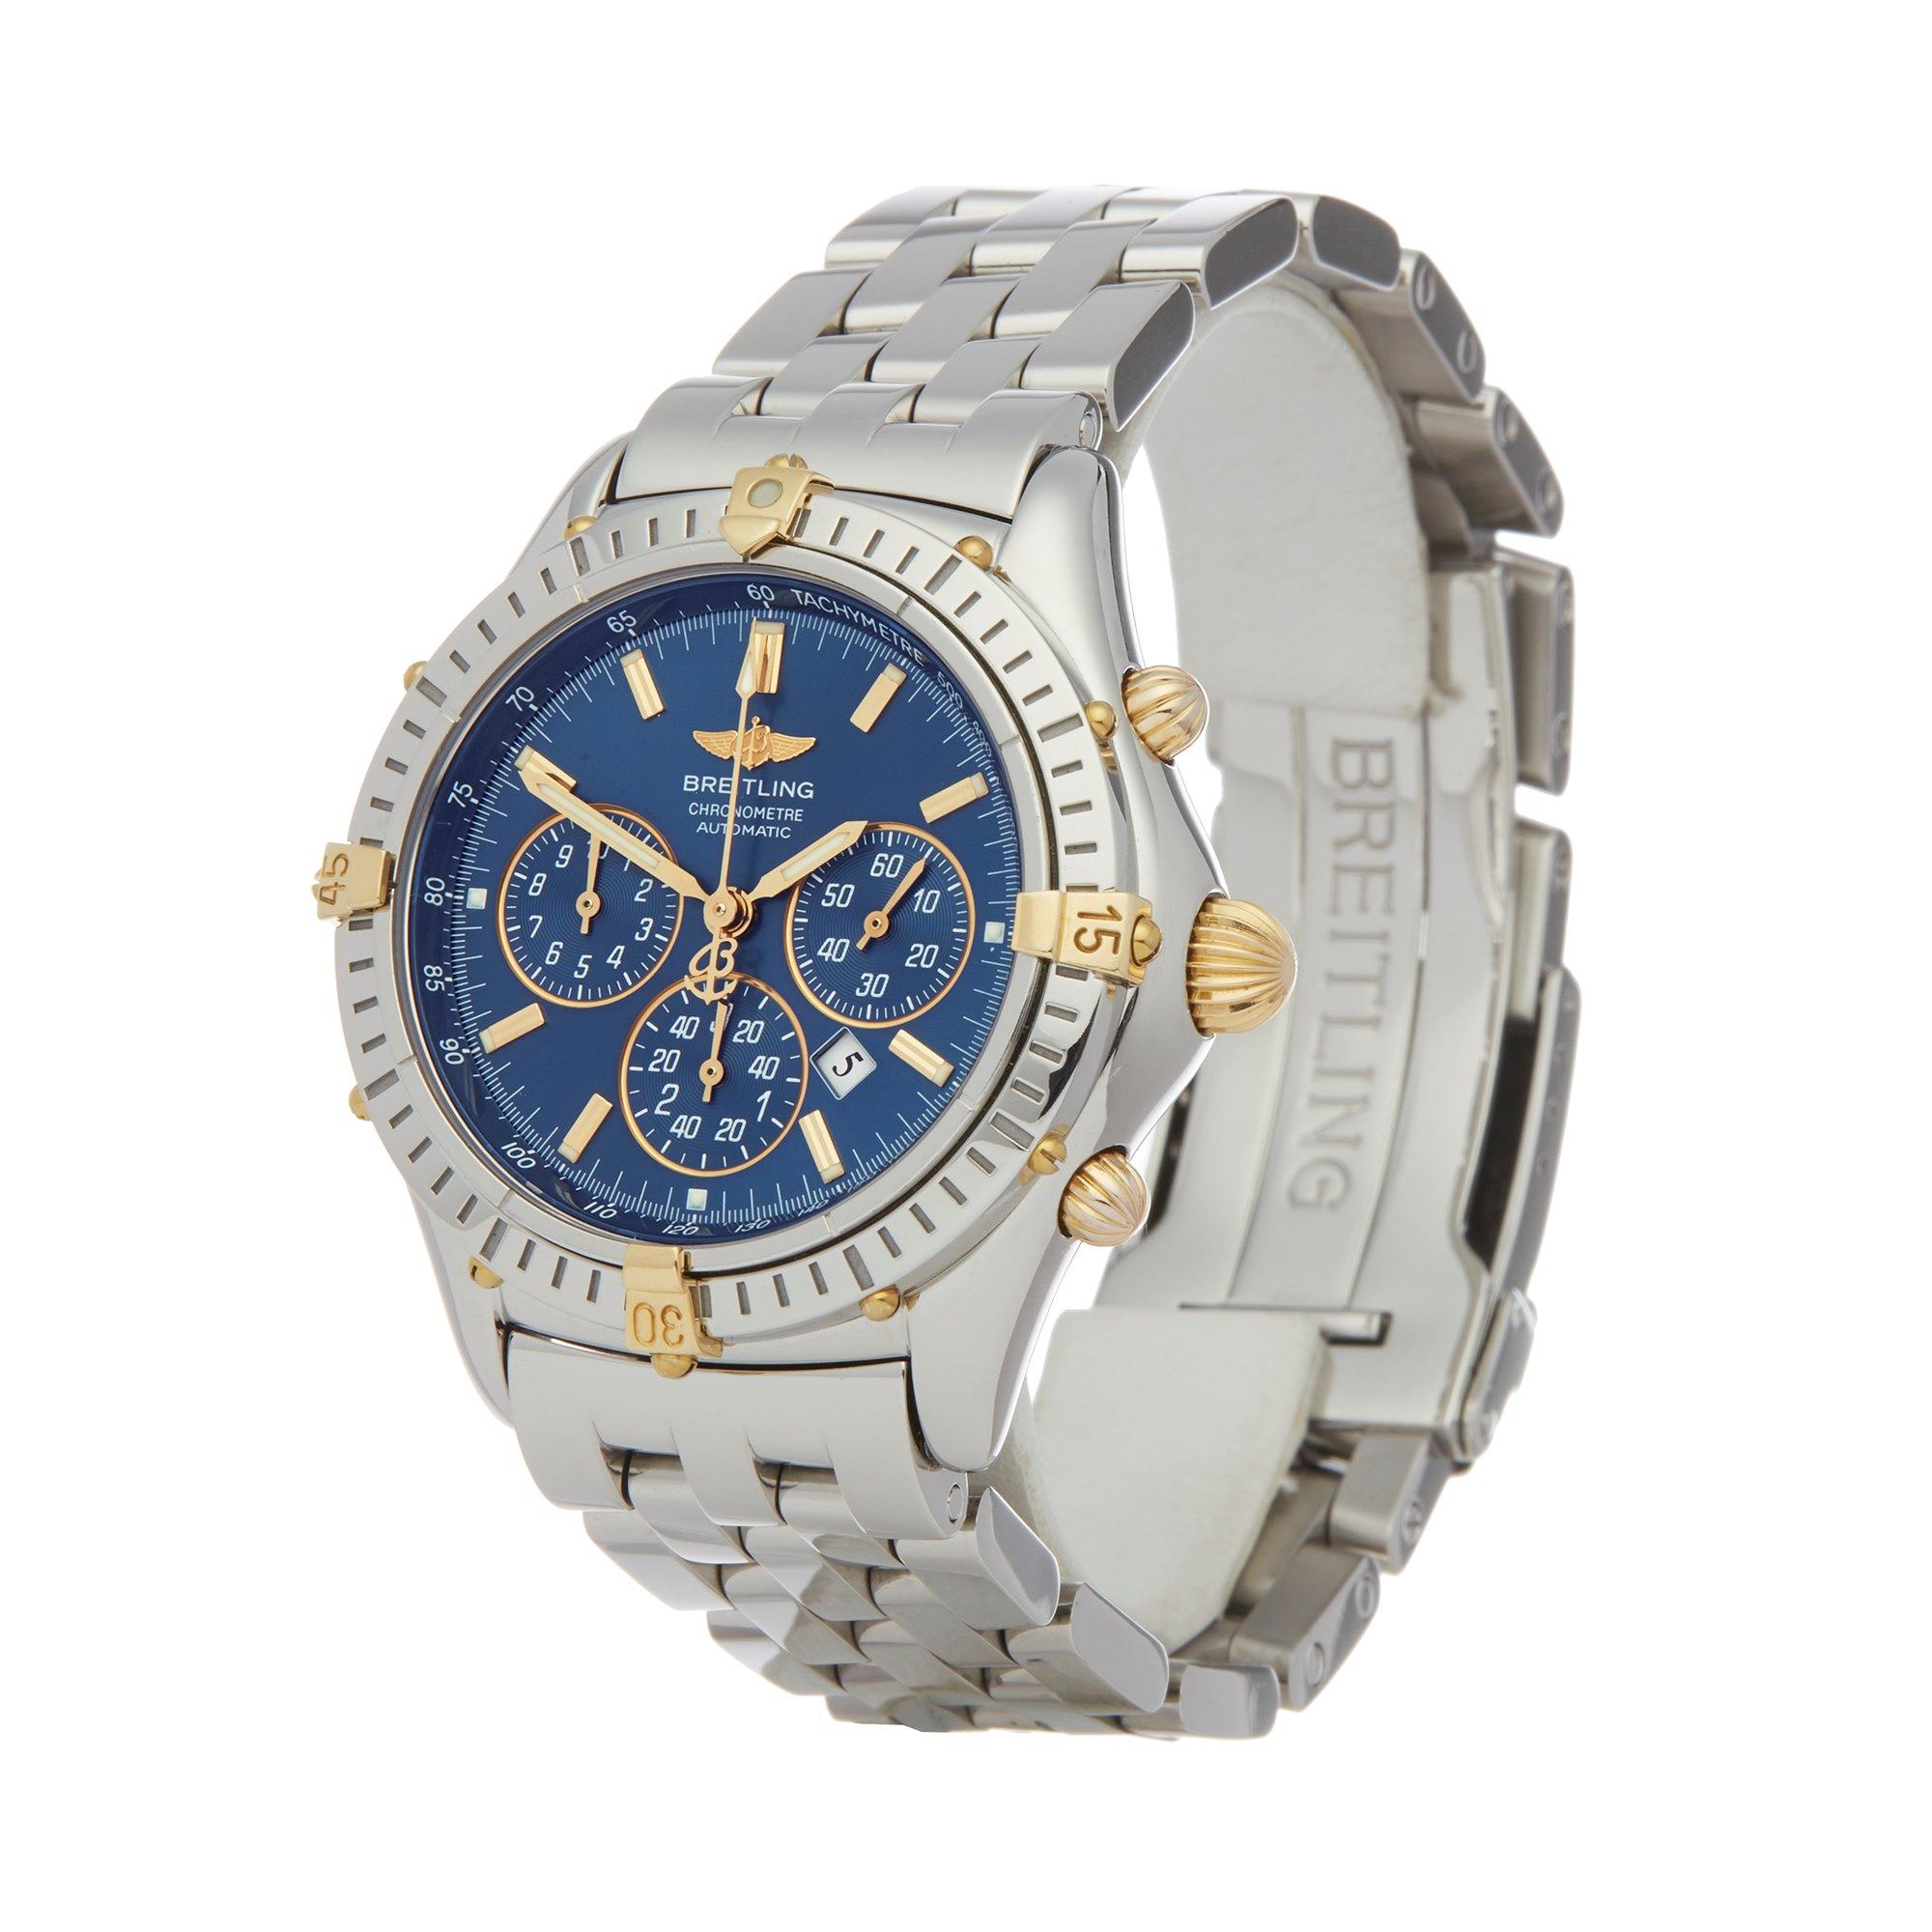 Xupes Reference: COM002604
Manufacturer: Breitling
Model: Shadow Flyback
Model Variant: 0
Model Number: B35312
Age: 2000
Gender: Men
Complete With: Box & Manuals Only
Dial: Blue with Gold Baton Markers
Glass: Sapphire Crystal
Case Material: